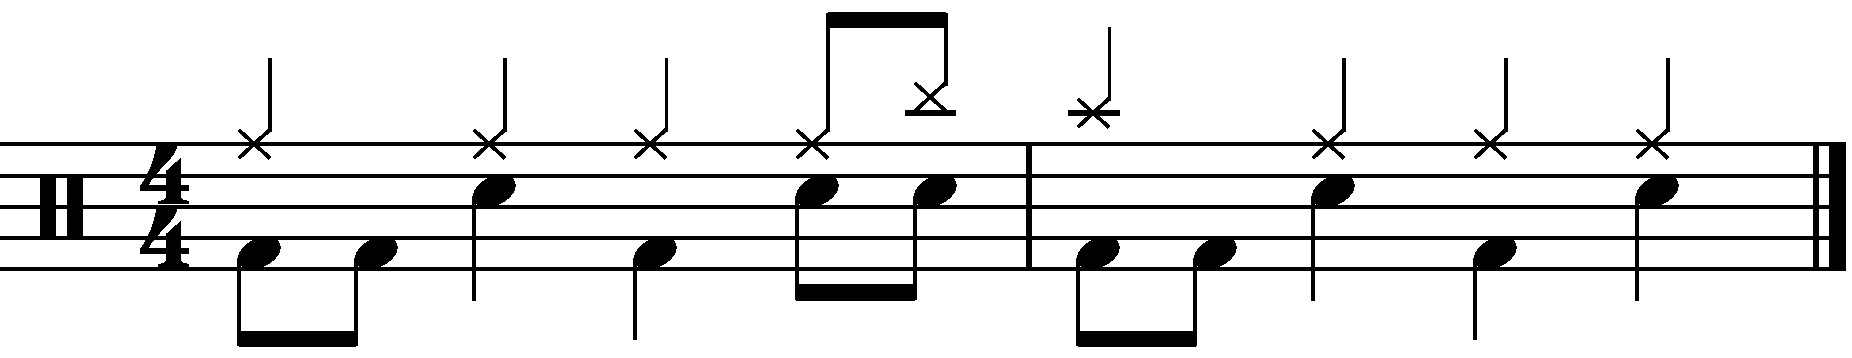 The concept applied to a common time groove with quarter note right hands